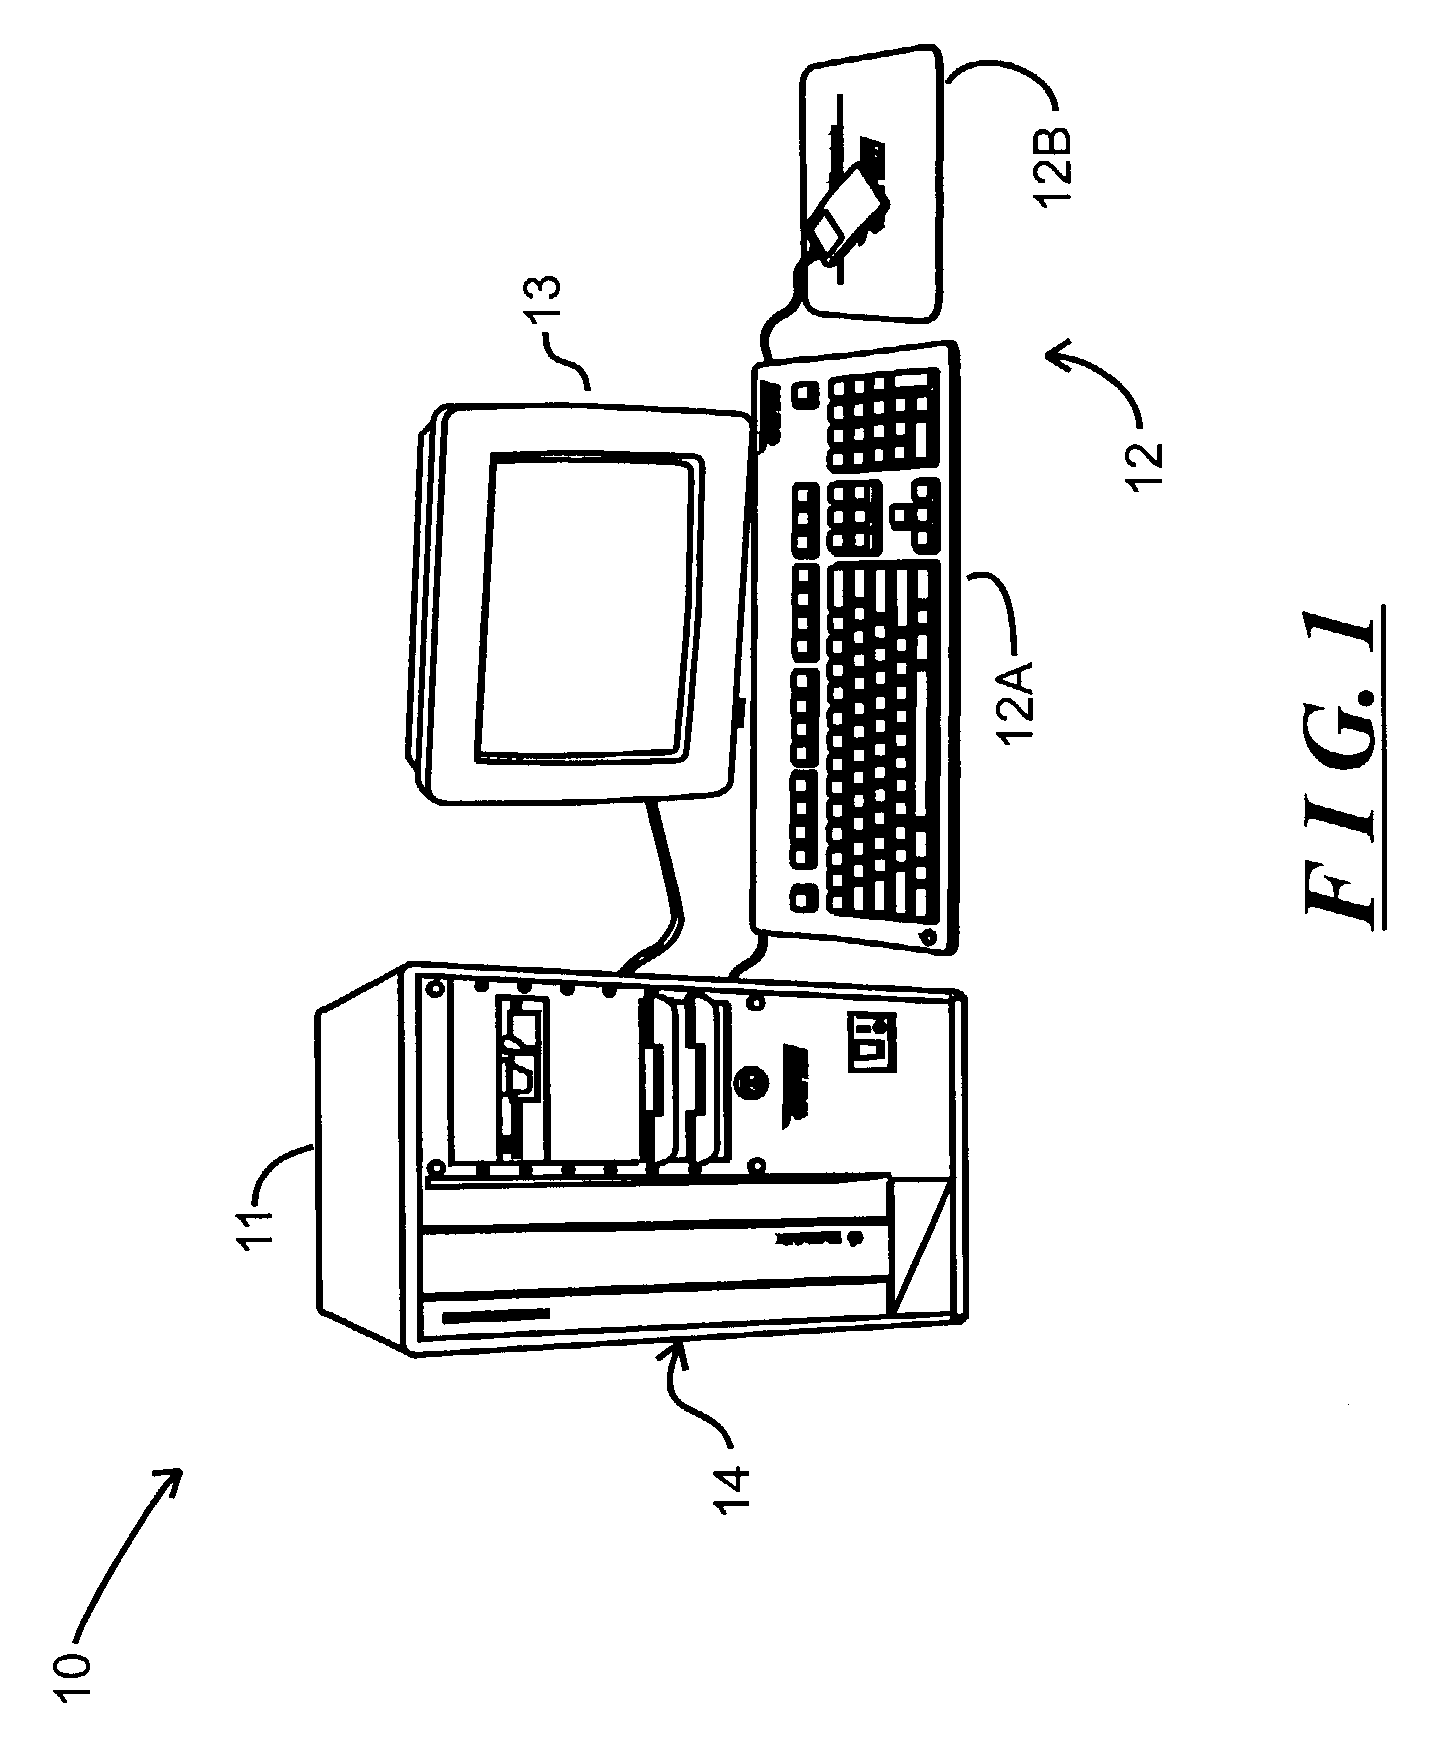 System and method for generating and using systems of cooperating and encapsulated shaders and shader dags for use in a computer graphics system